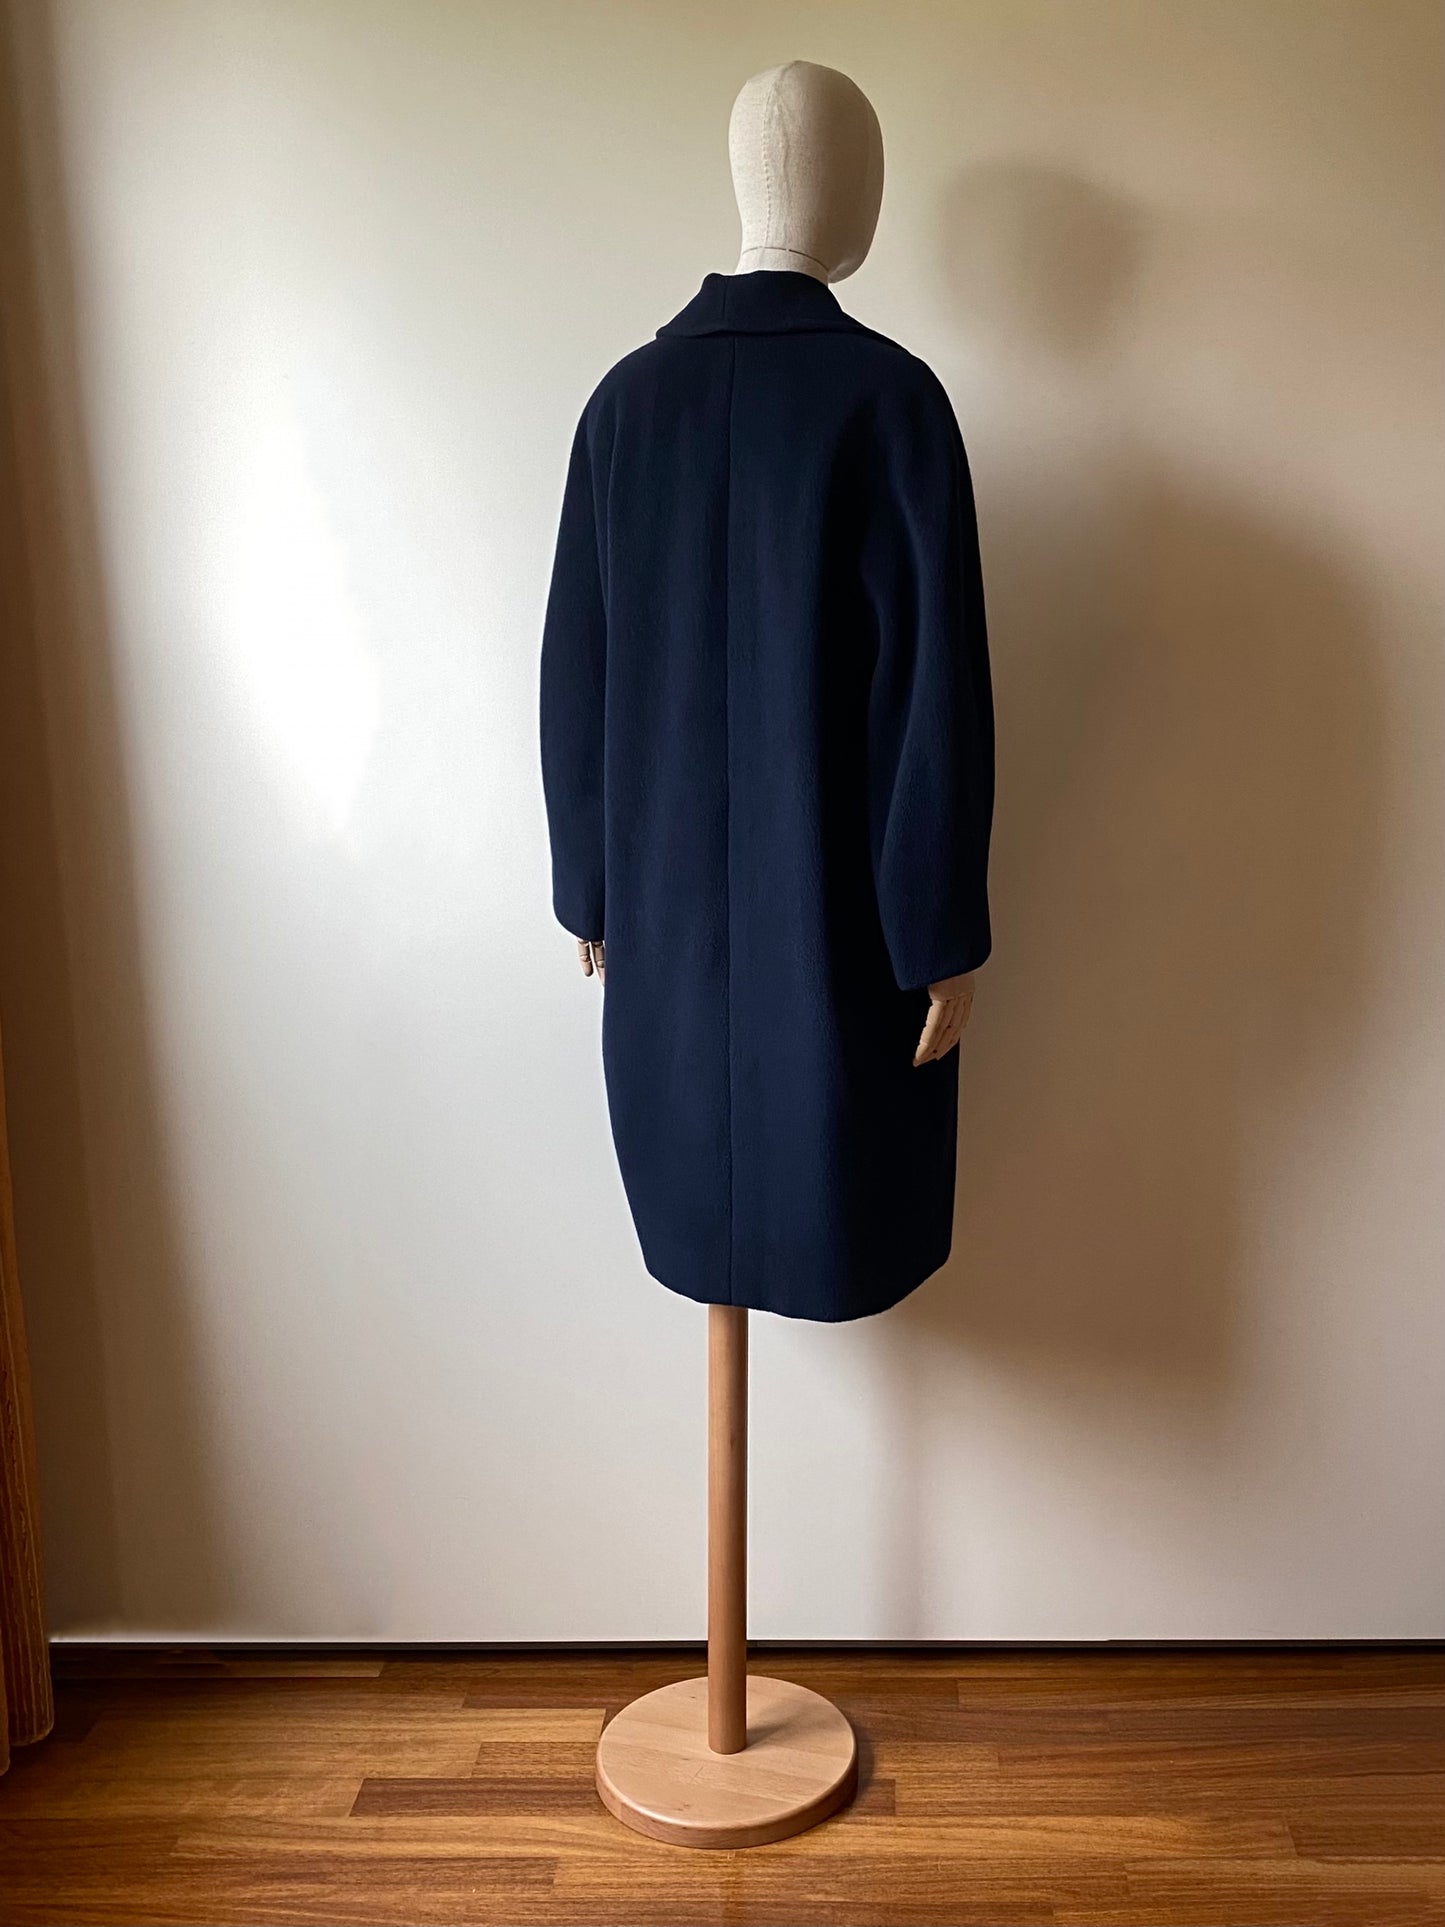 Wool and Cashmere Midnight Blue Coat